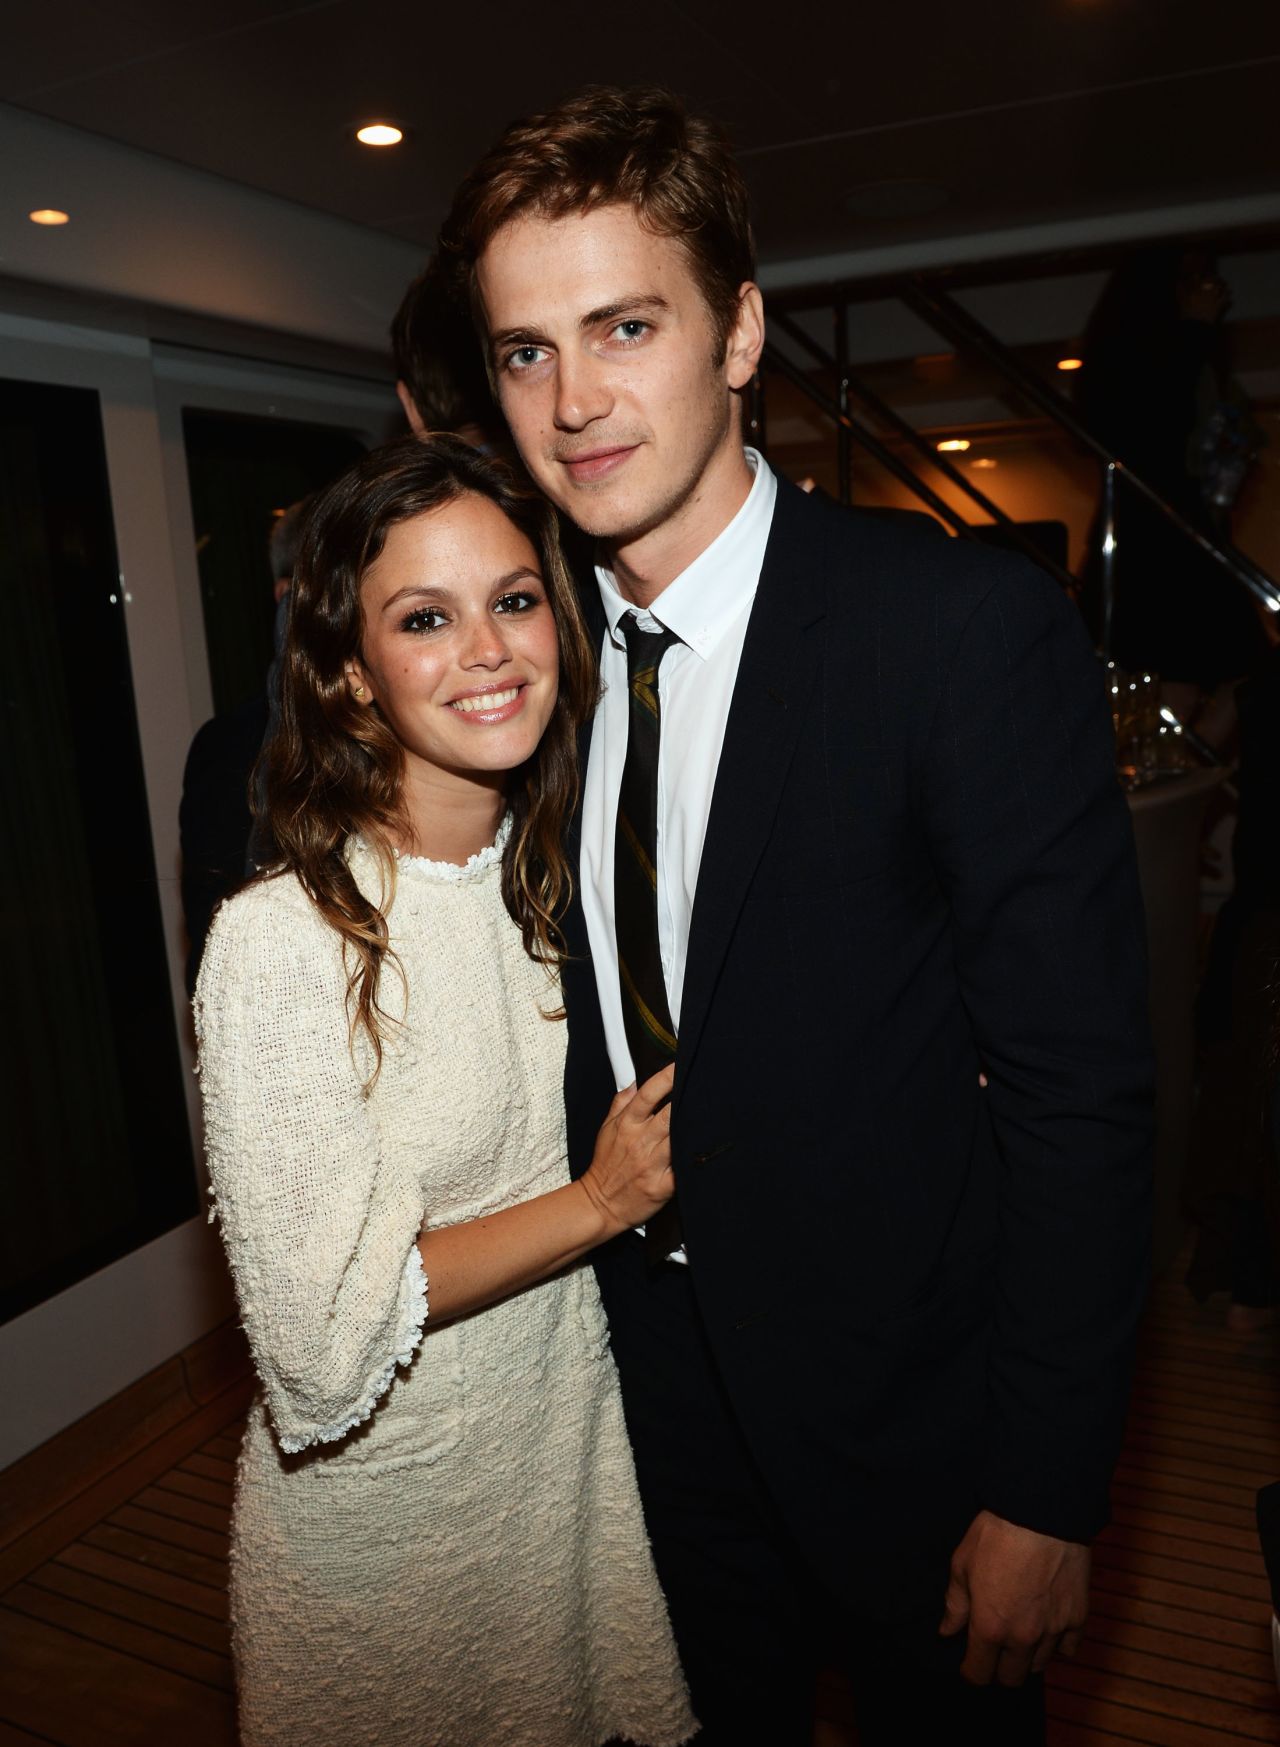 All of the hoopla surrounding the end of their engagement in 2010 may contribute to why Rachel Bilson and Hayden Christensen don't really discuss their now-reconciled relationship. It was <a href="http://www.usmagazine.com/celebrity-moms/news/rachel-bilson-pregnant-jaime-king-says-costar-wanted-a-baby-so-badly-2014265" target="_blank" target="_blank">reported in May that the couple were expecting their first child. </a>